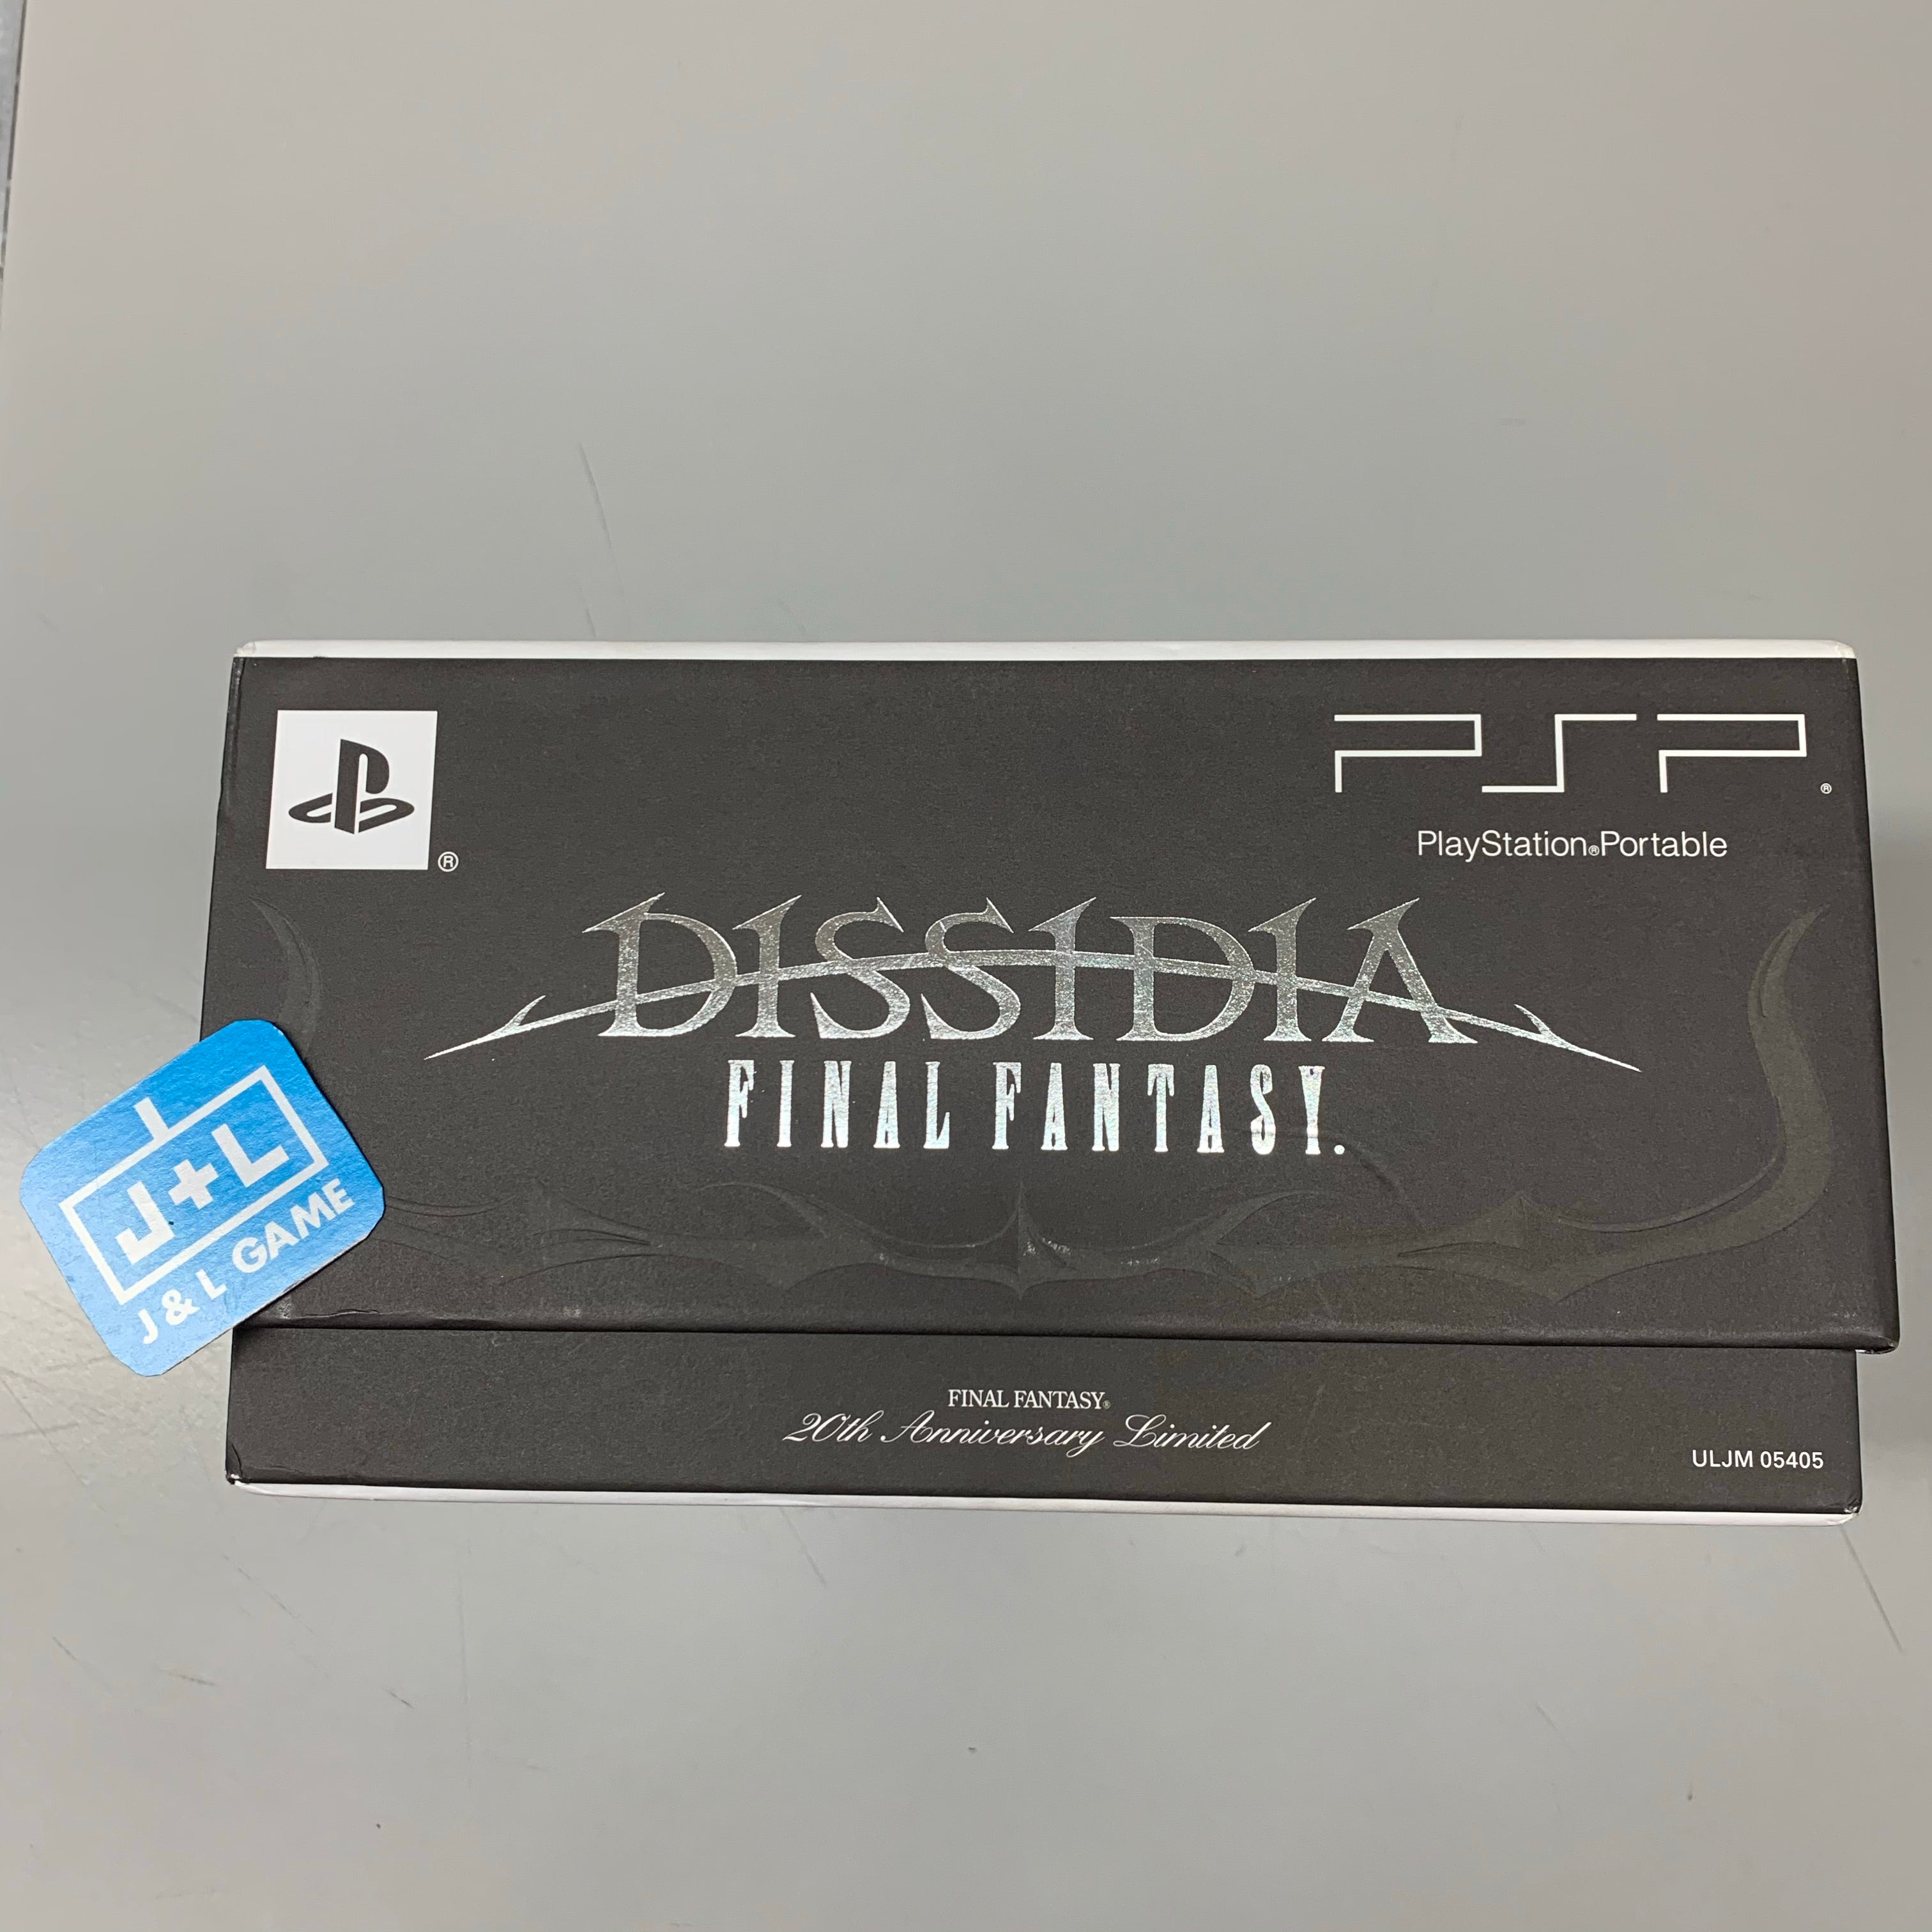 Sony PlayStation Portable" Dissidia Final Fantasy (FF20th Anniversary Limited) - Sony PSP [Pre-Owned] (Japanese Import) Consoles J&L Game   